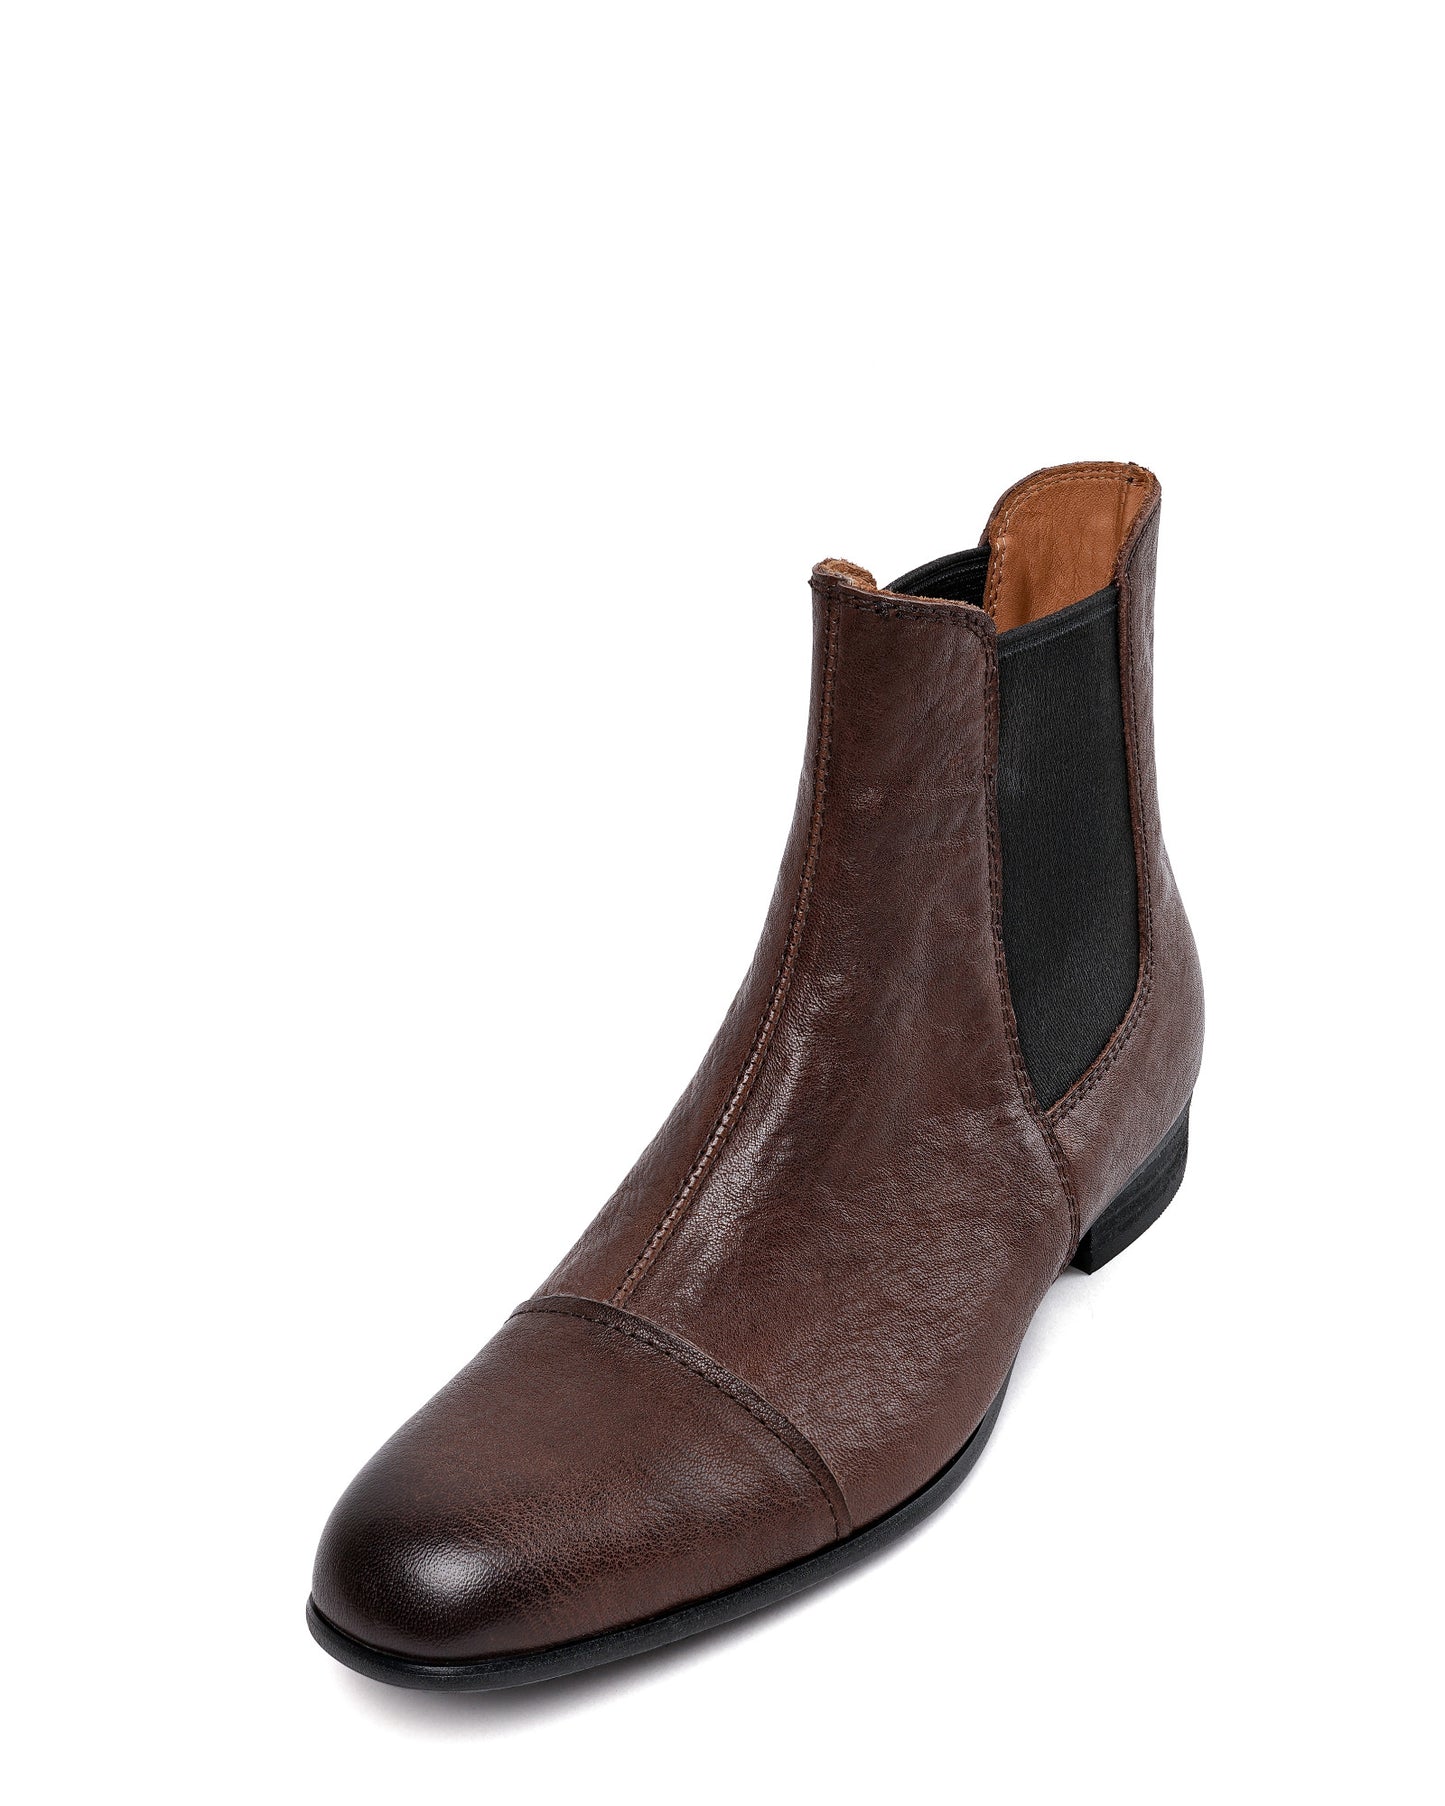 370-cap-toe-brown-leather-boots